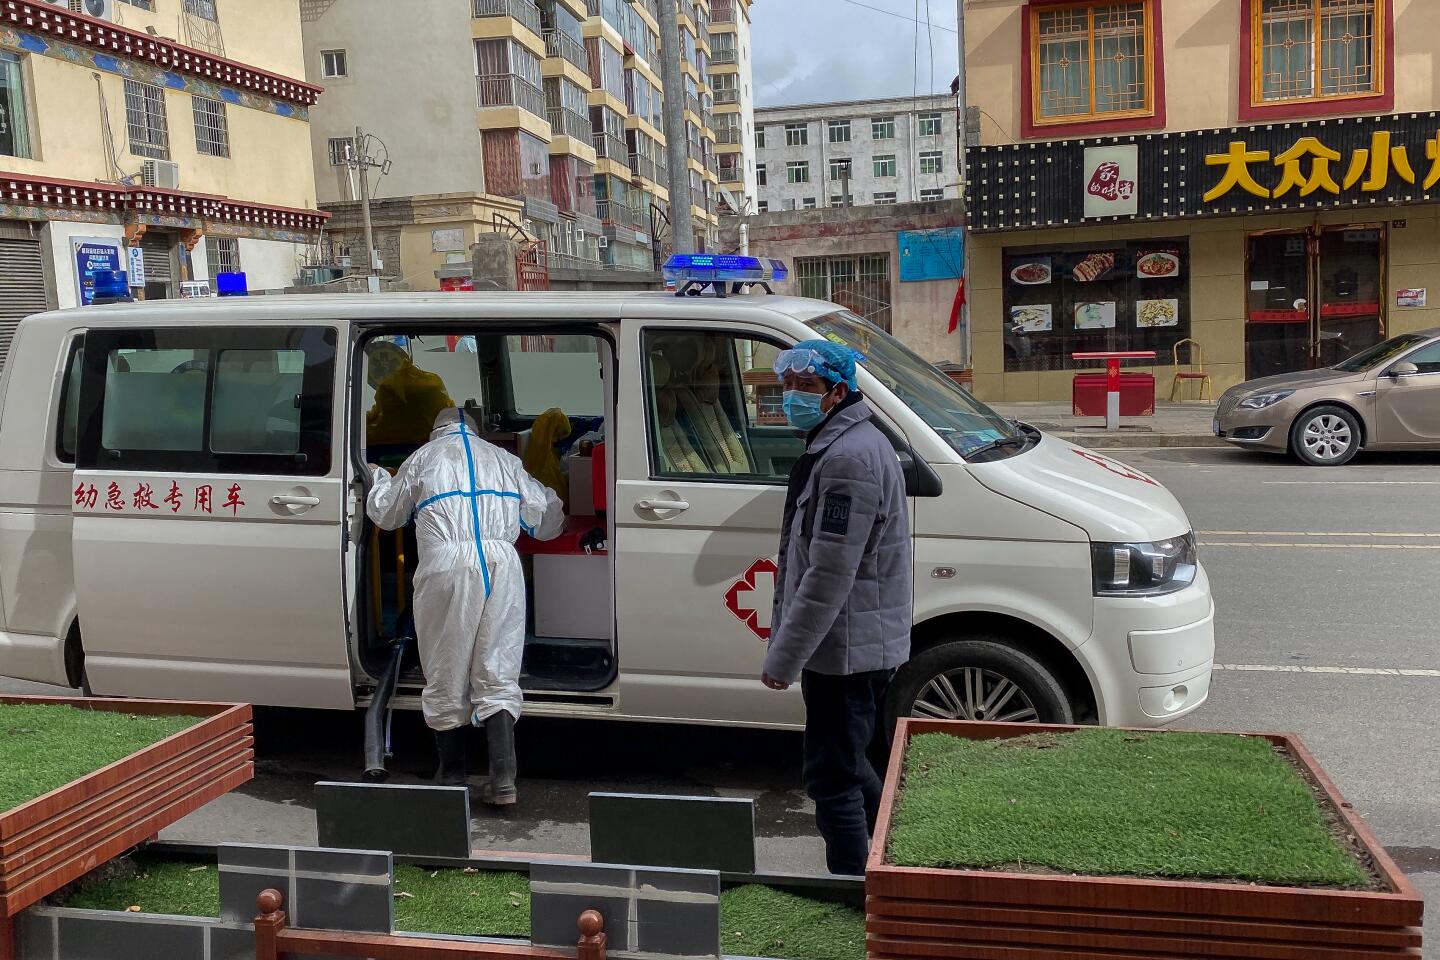 A sanitation vehicle driving around Garze on Feb. 2, 2020. The workers in the vehicle wore protective gear and broadcast instructions about virus prevention in Mandarin through loudspeakers as they went around the city.